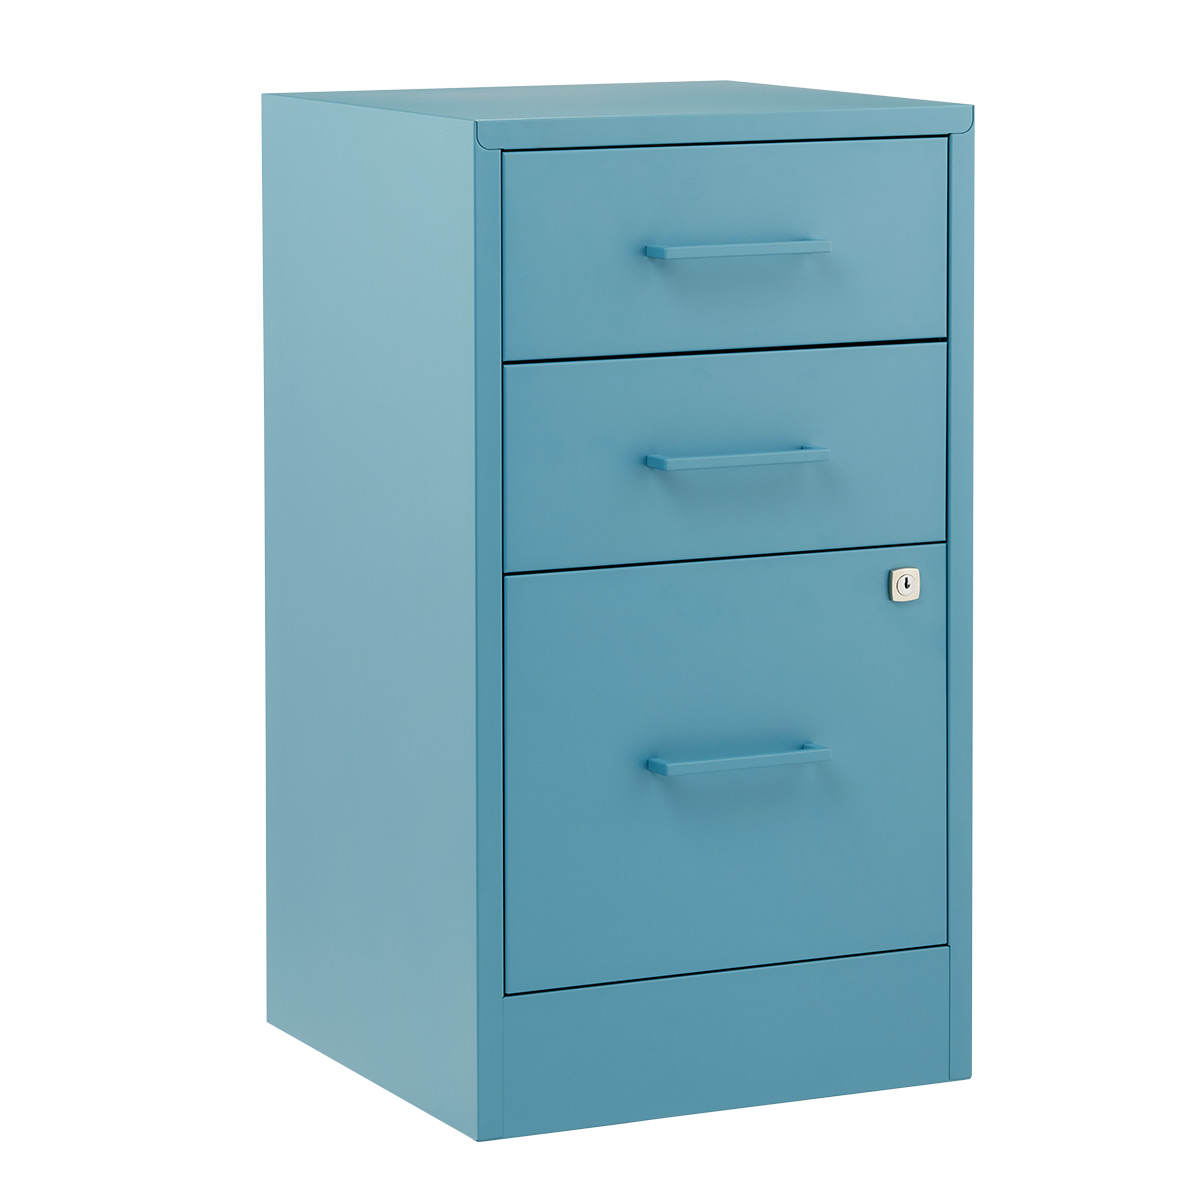 2-Drawer Slate Blue Locking Filing Cabinet | The Container Store